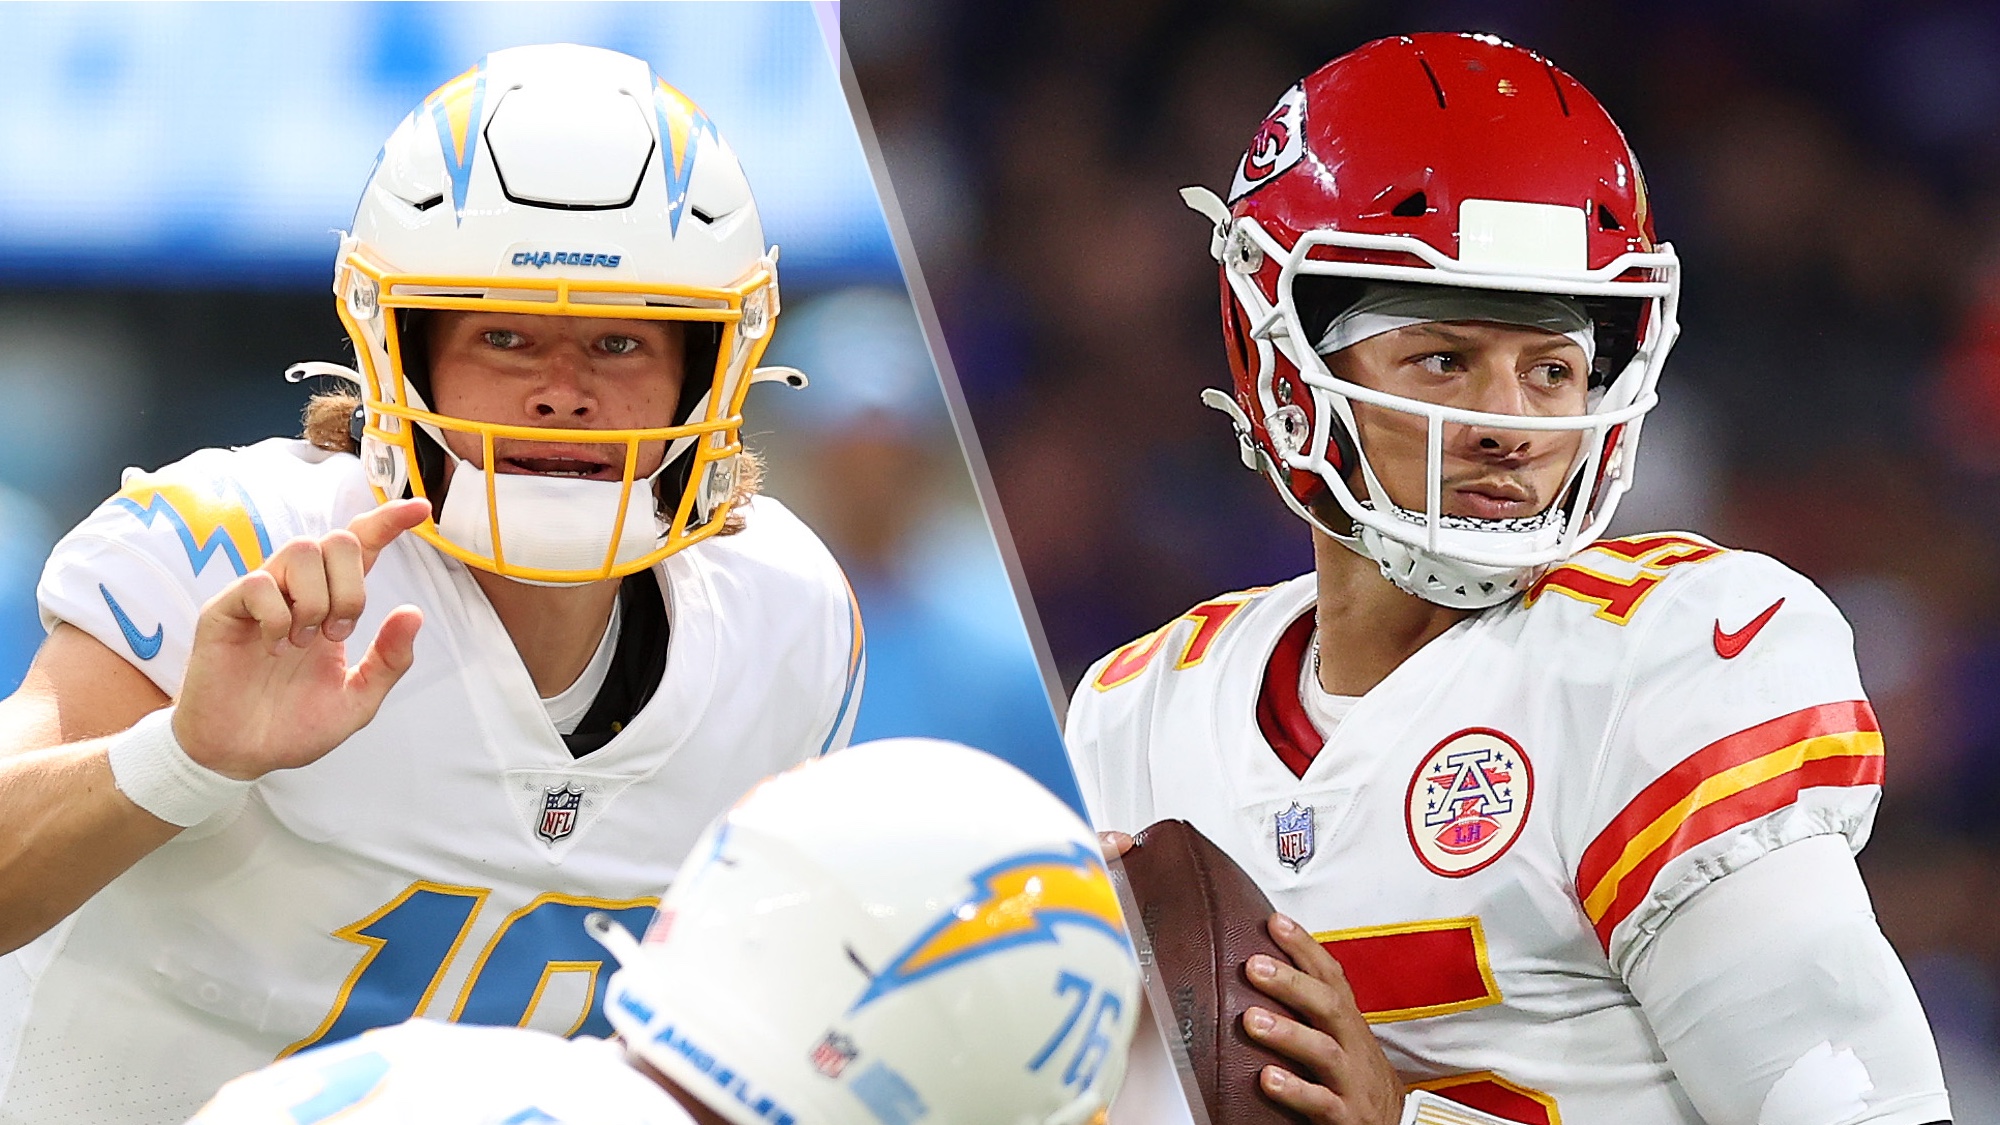 Chargers vs Chiefs live stream: How to watch NFL week 3 game online